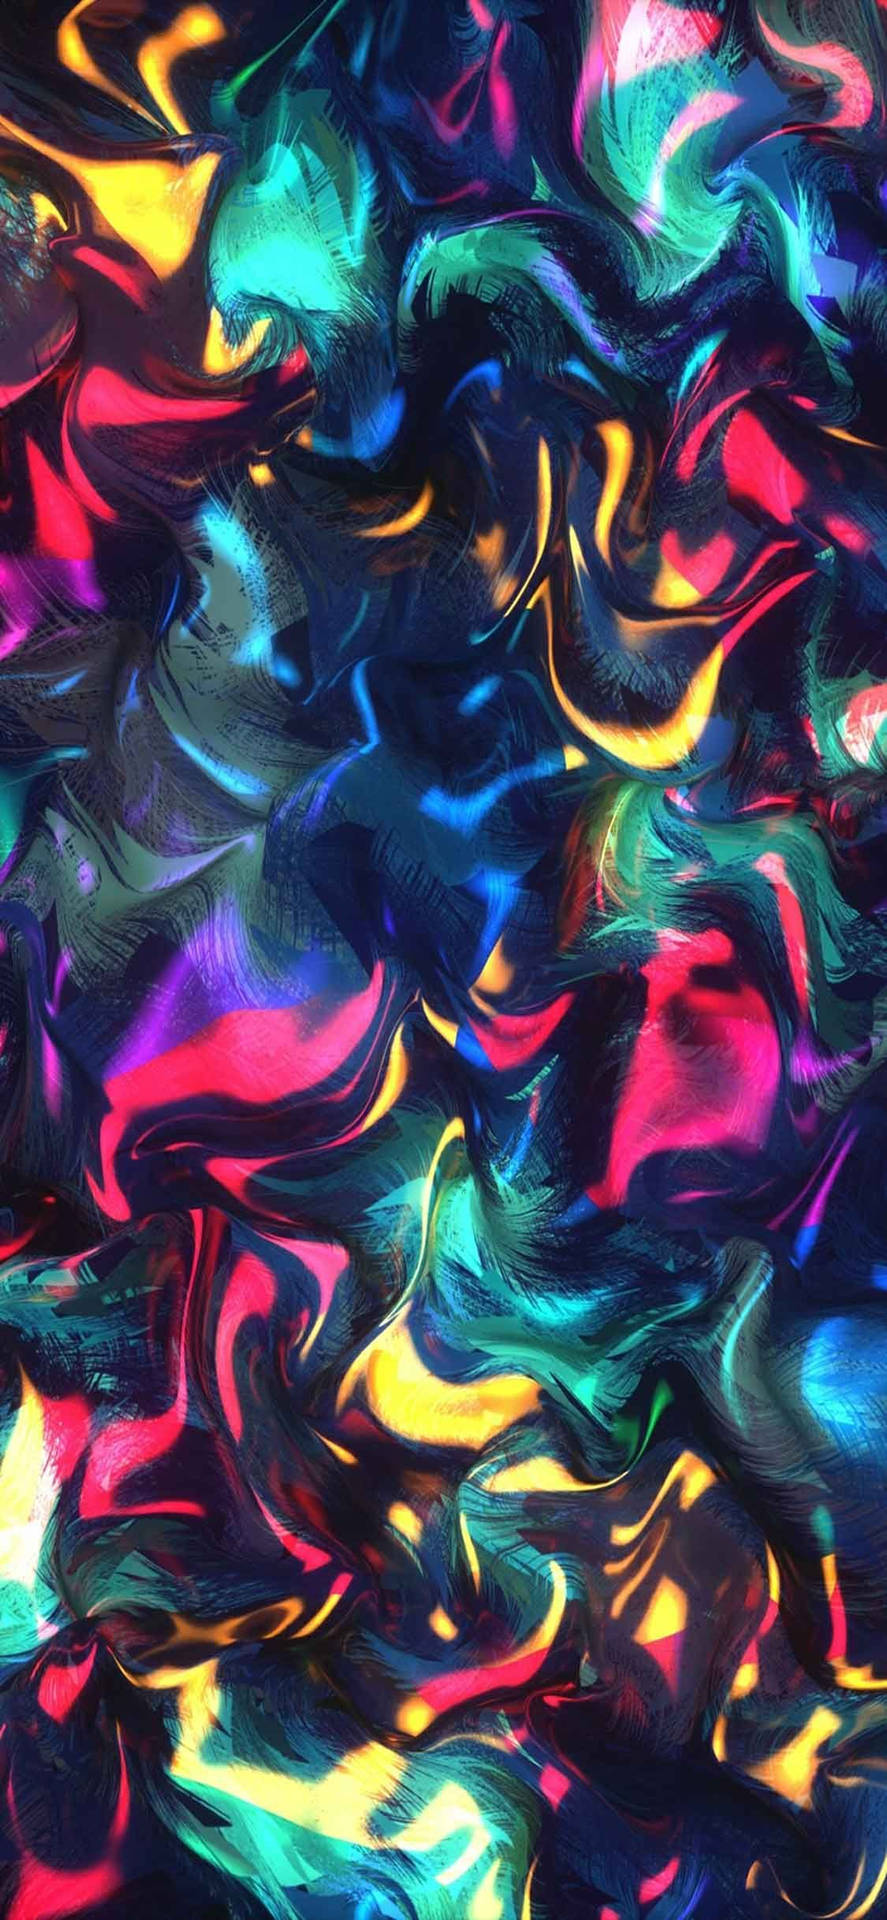 "An Exciting Vision of Colorful Coolness" Wallpaper